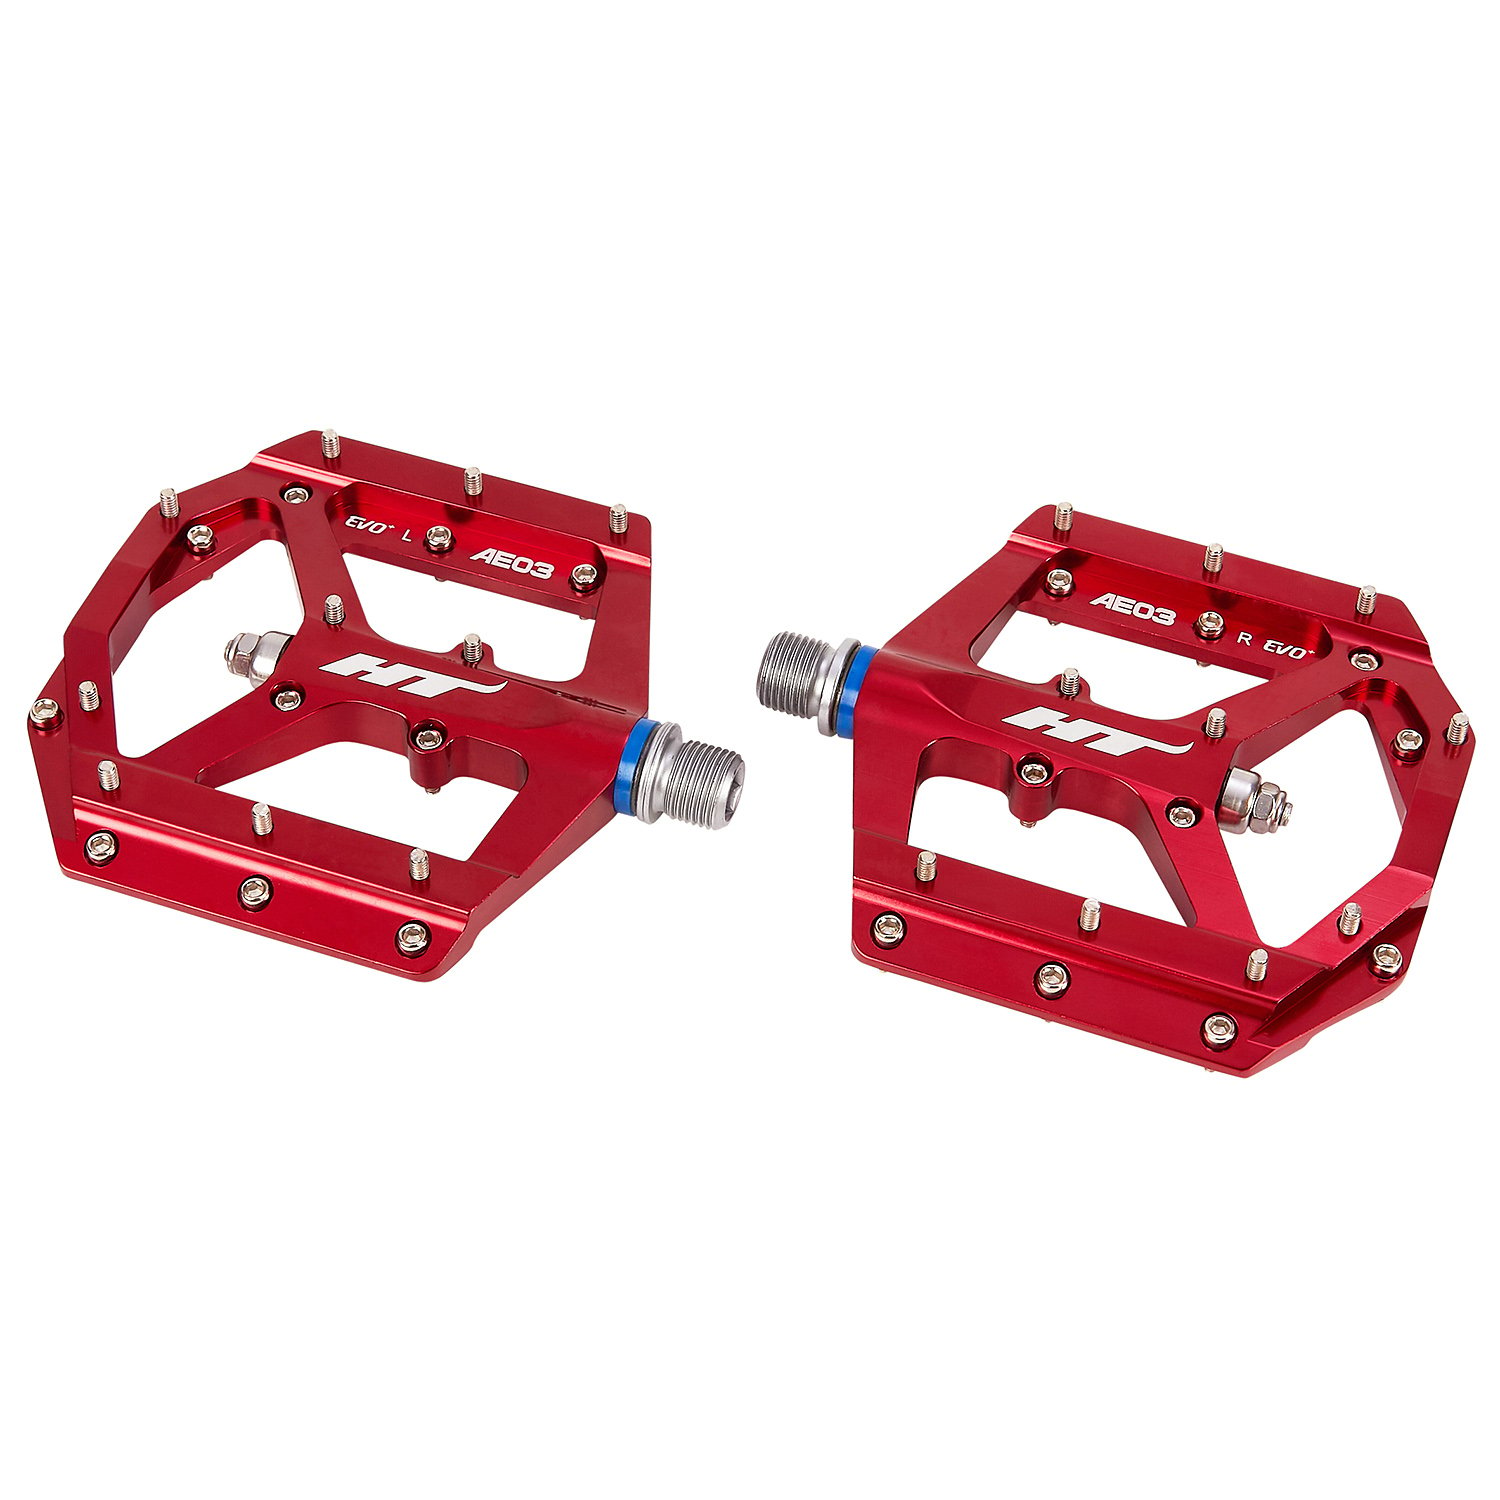 HT Components Pedals AE03 Red